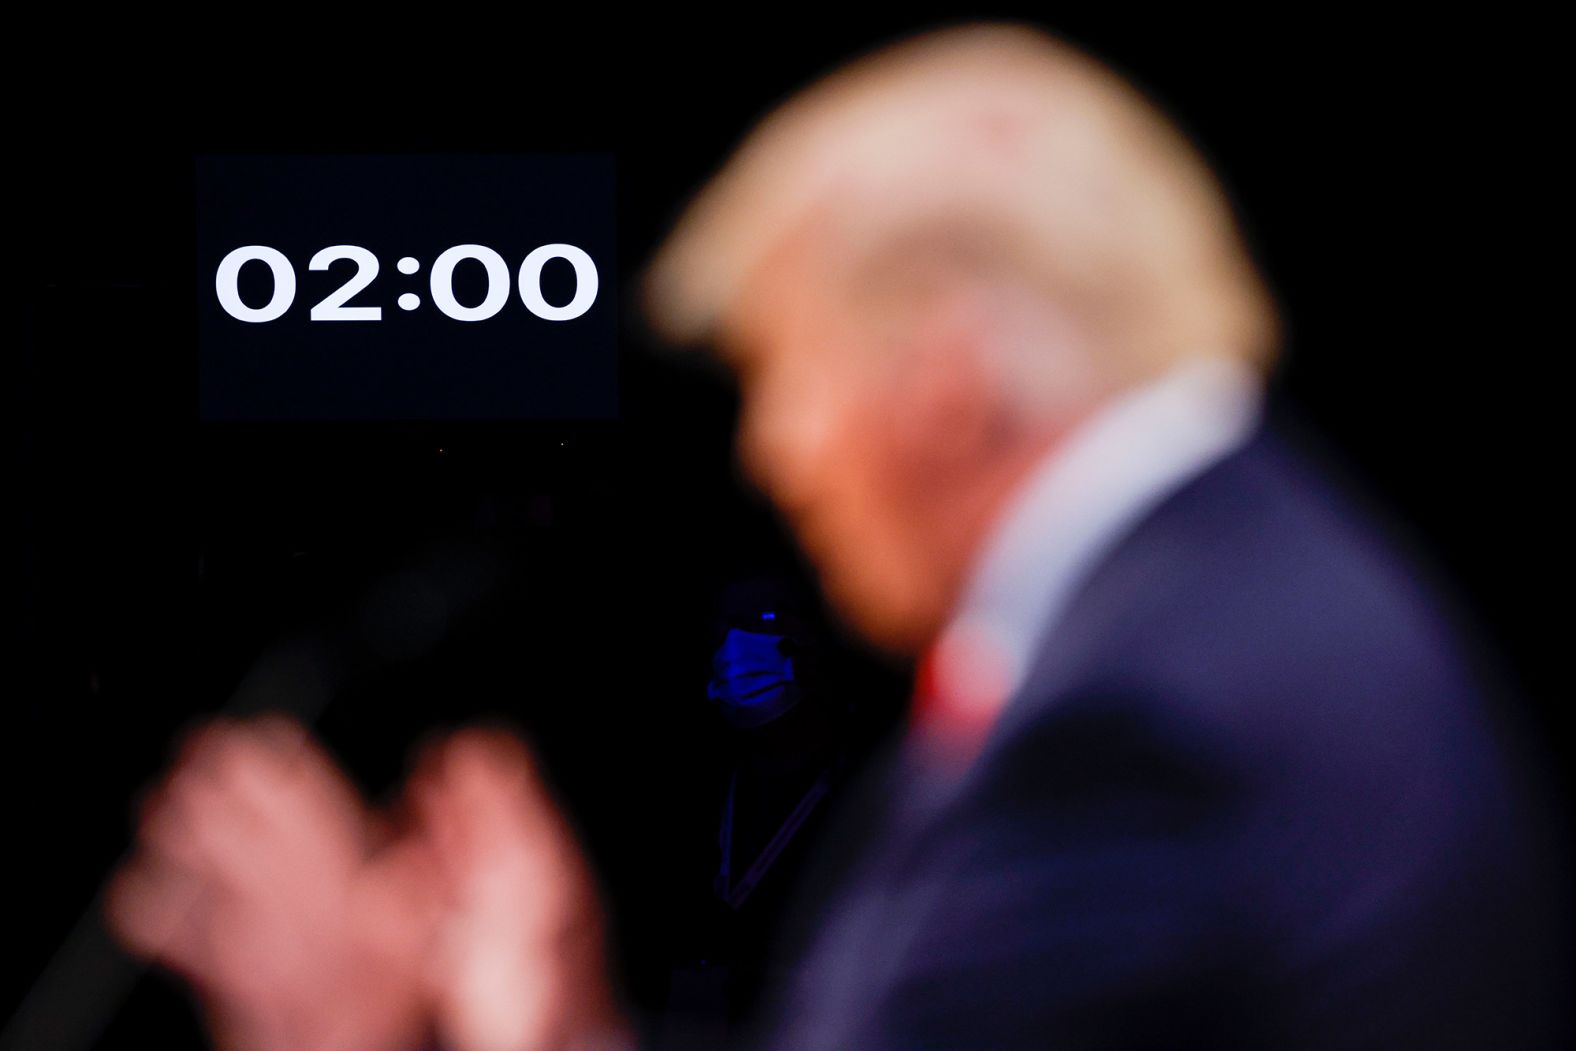 A timer is shown near Trump. Each candidate got two uninterrupted minutes to speak at the start of each debate segment.